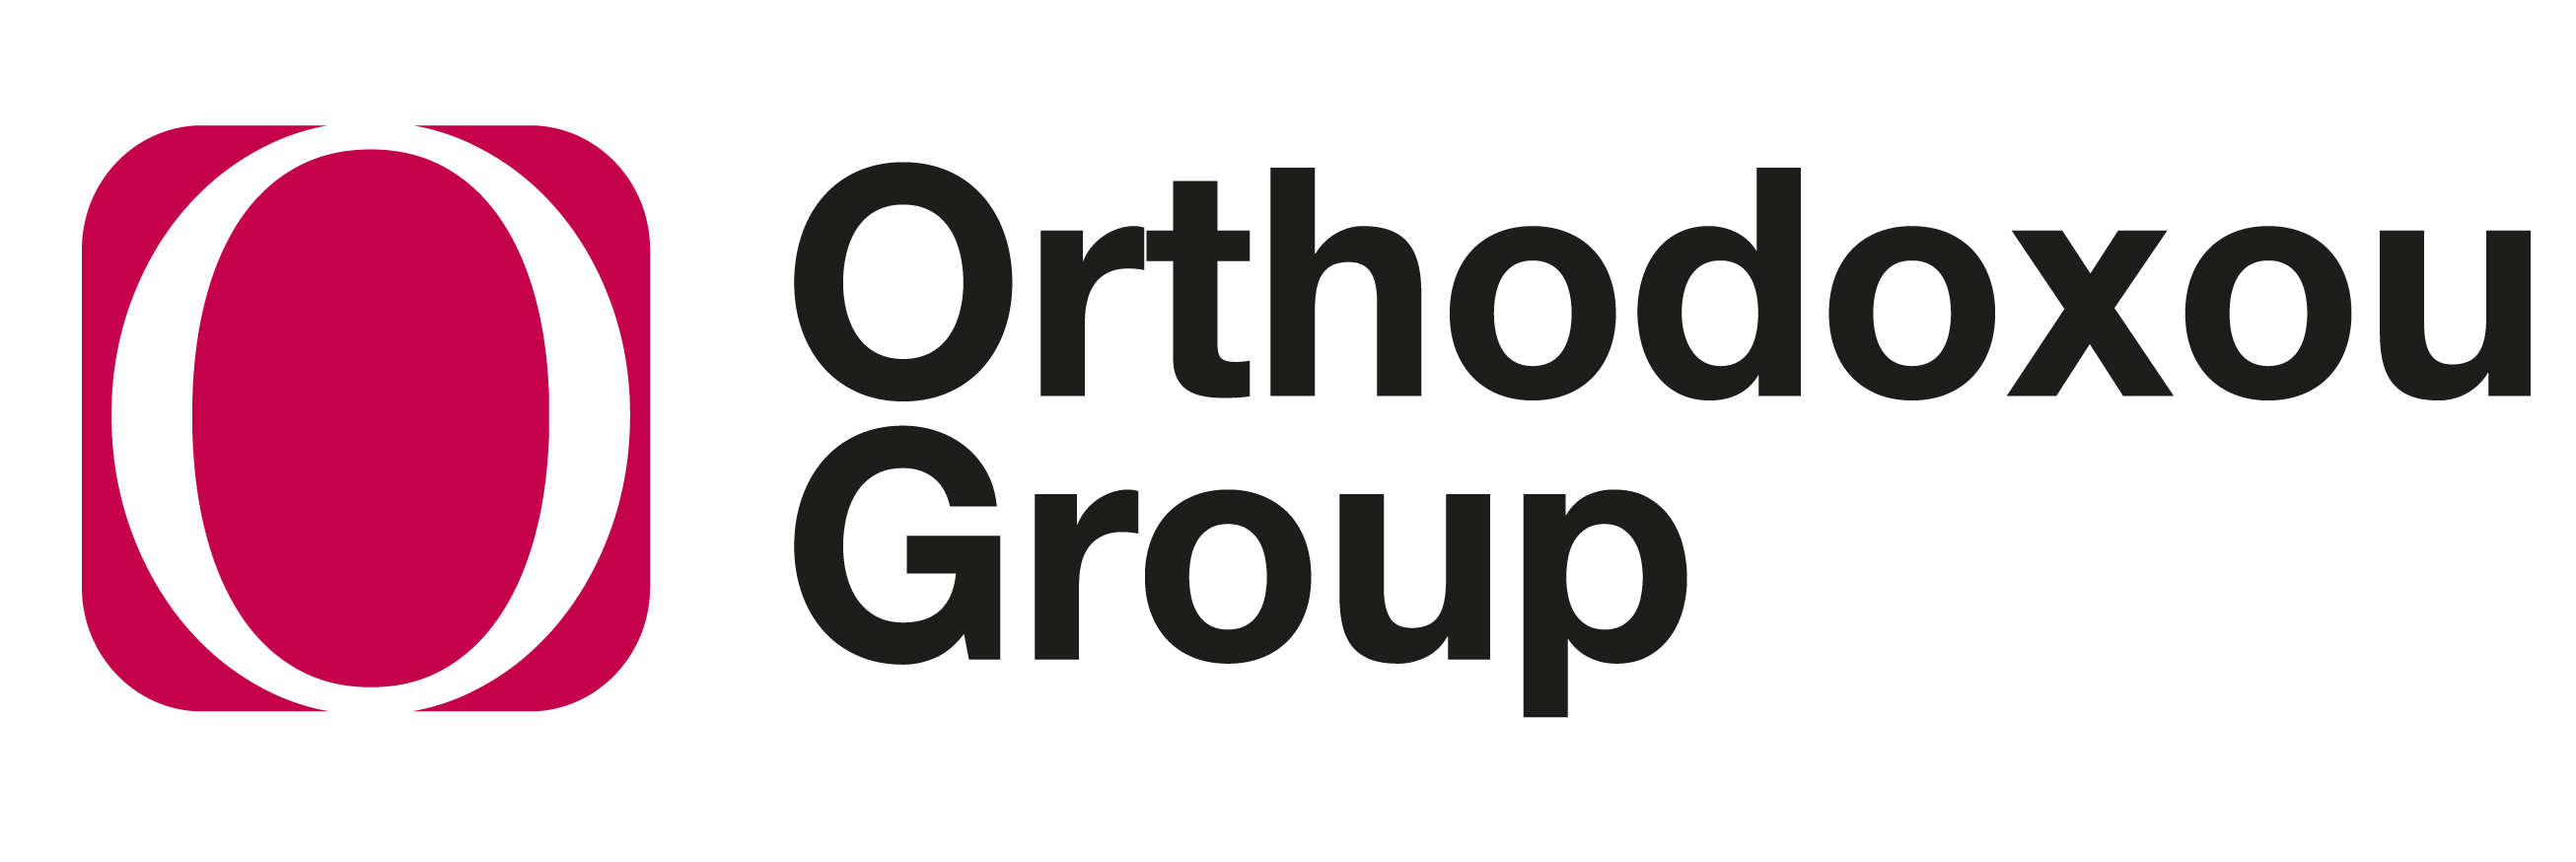 Orthodoxou Group of Companies 